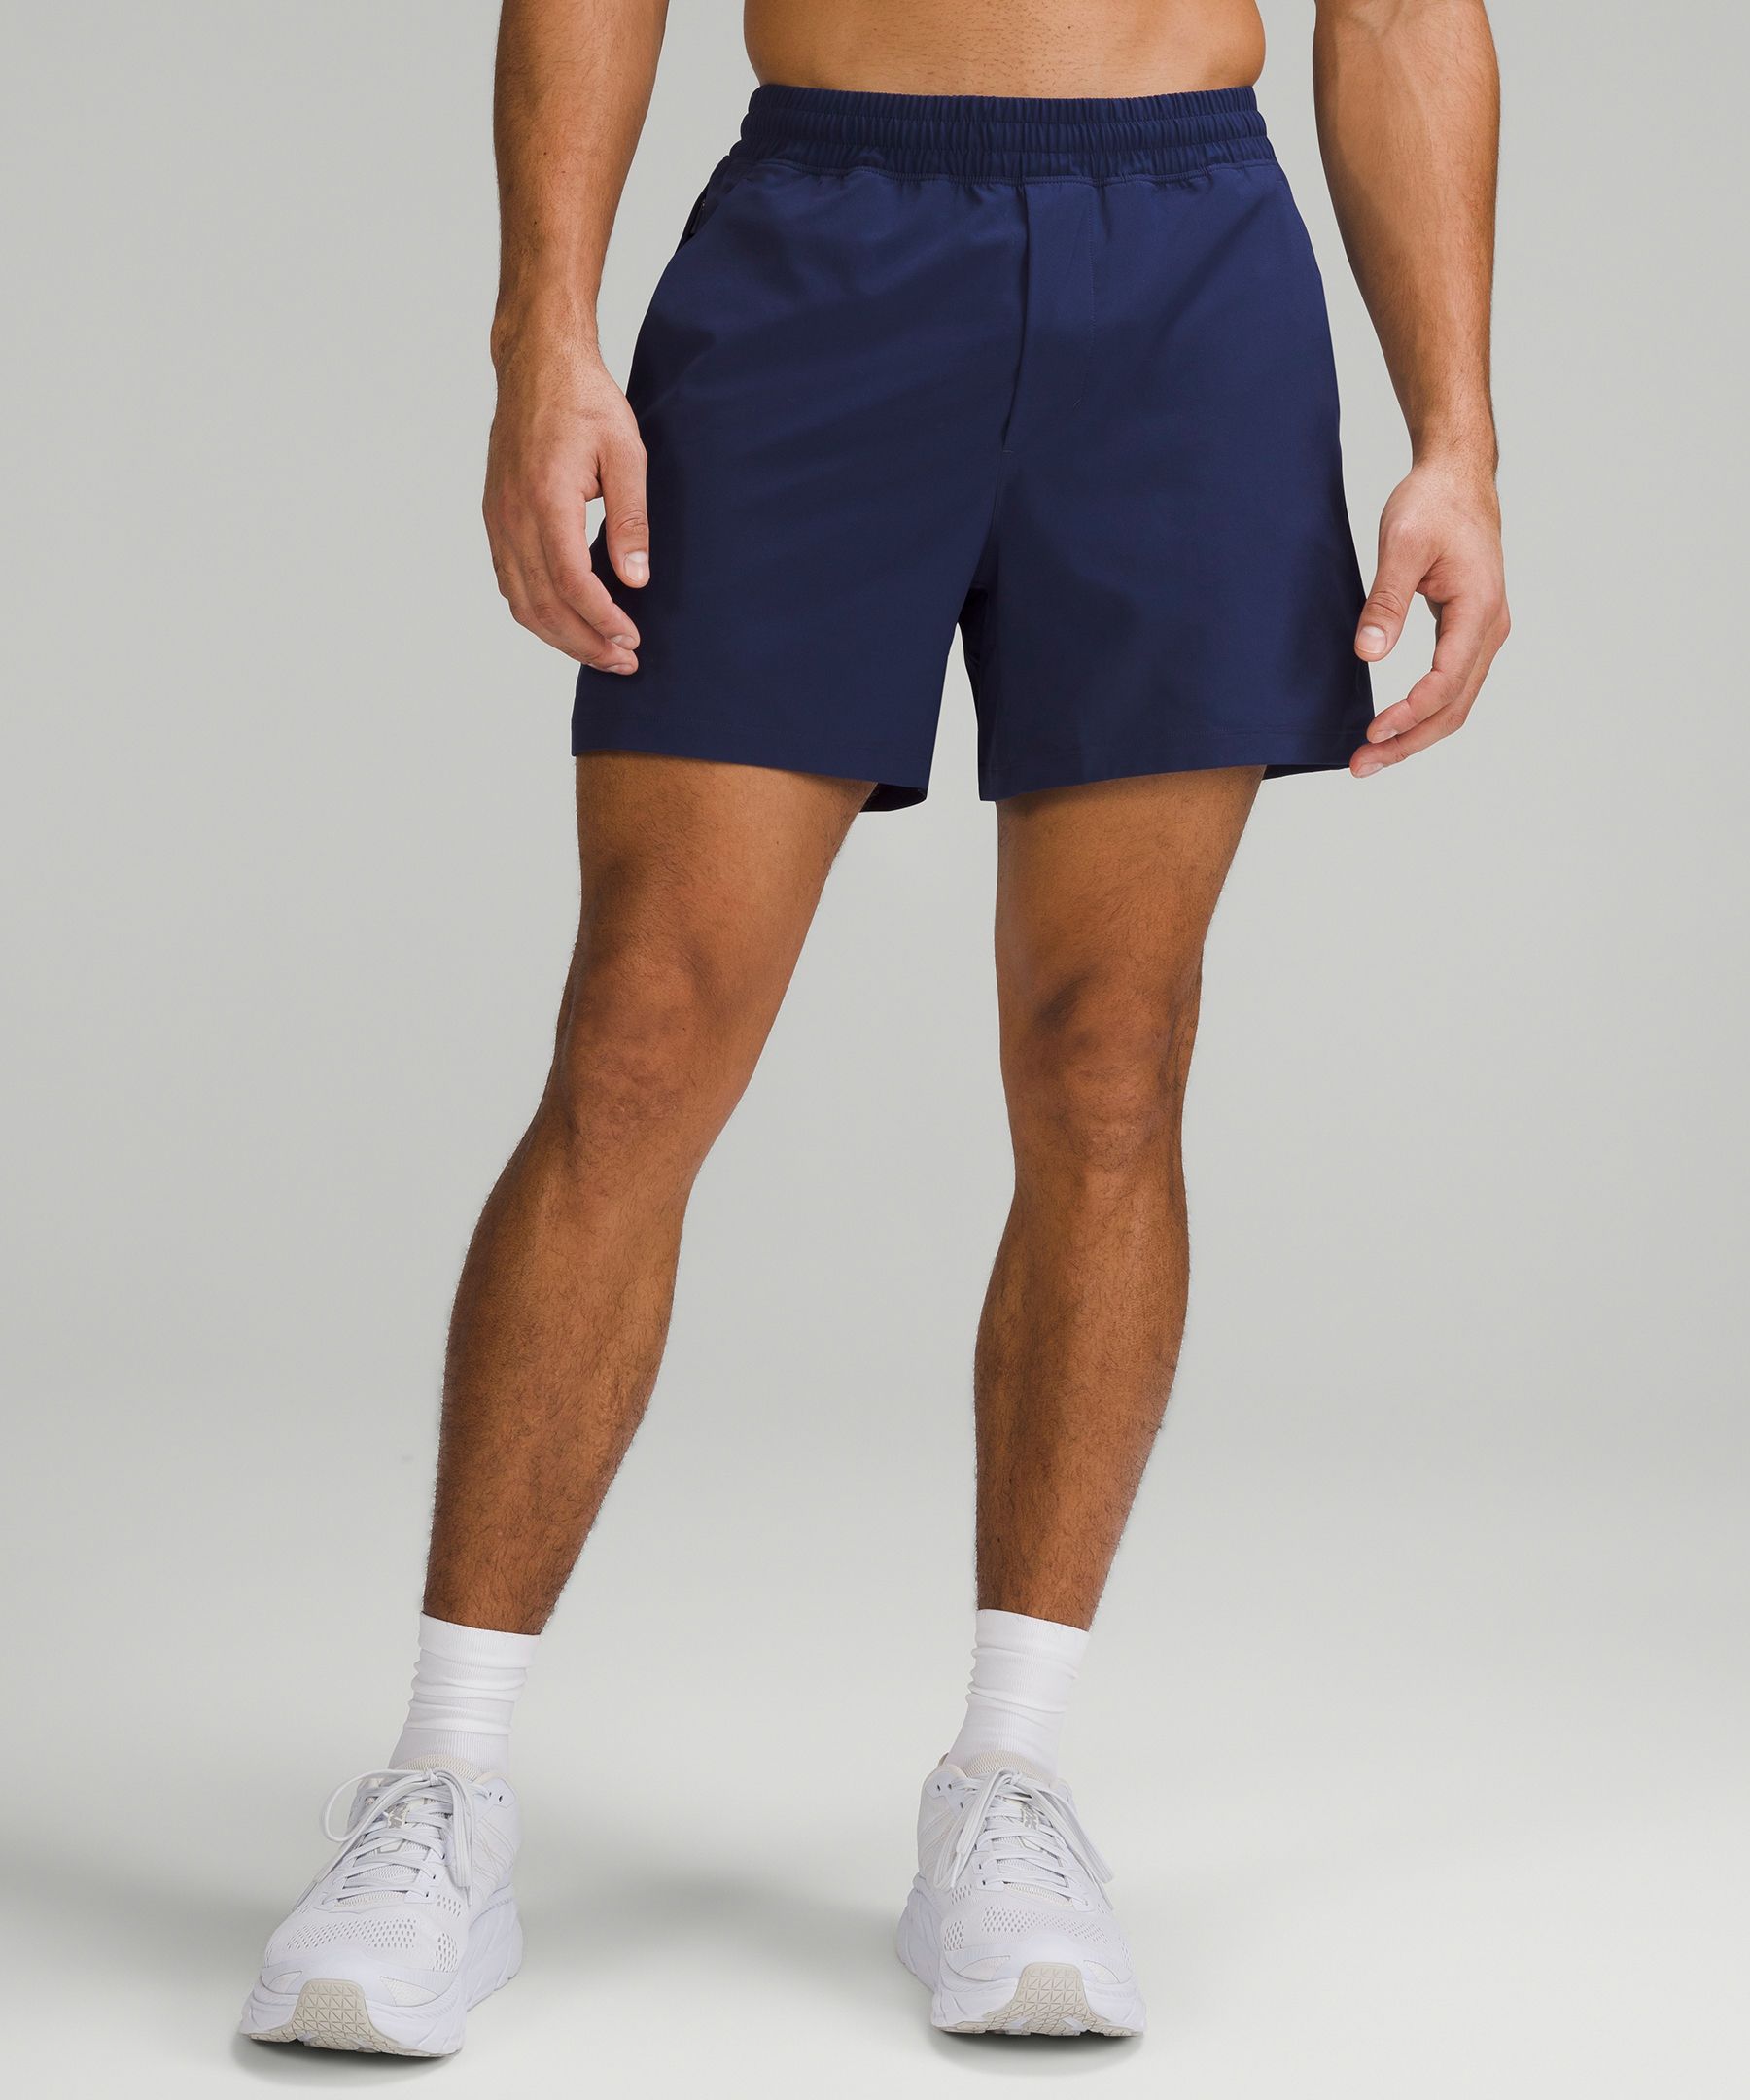 We Made Too Much Sale: Best discounts on Lululemon shorts this week  (6/8/23) 